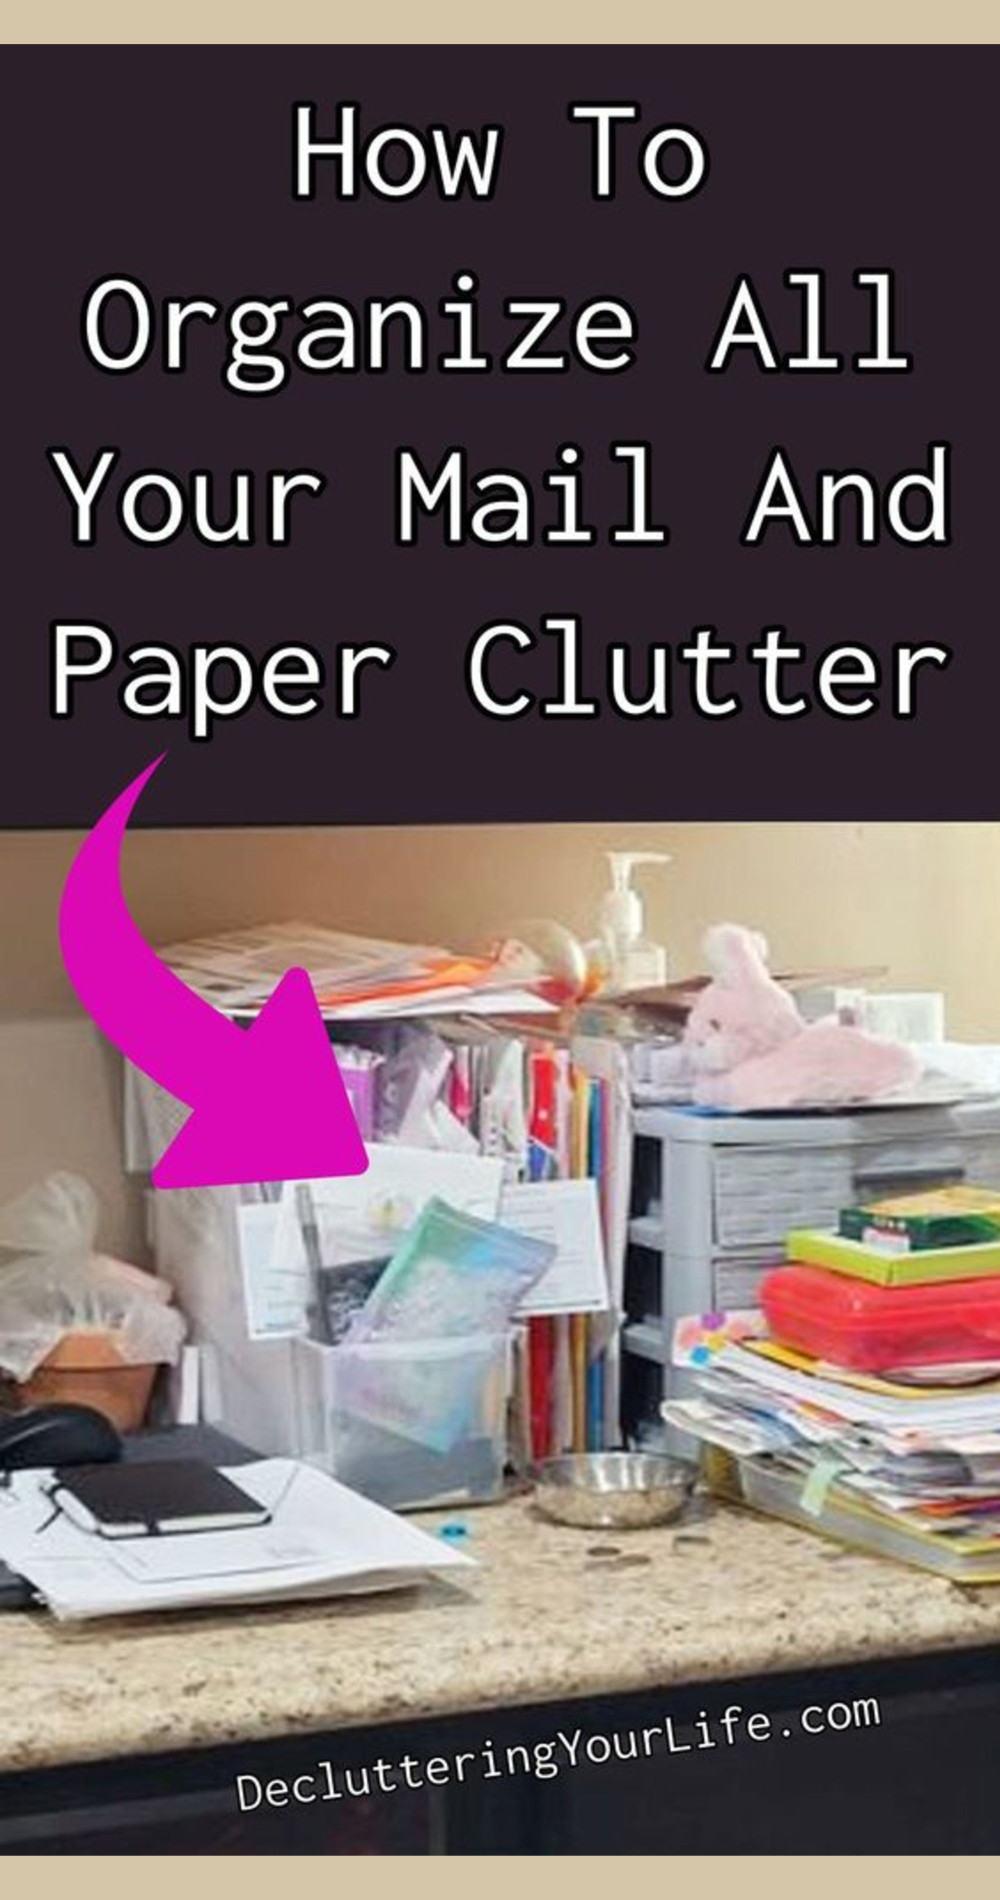 How to organize all your mail and paper clutter